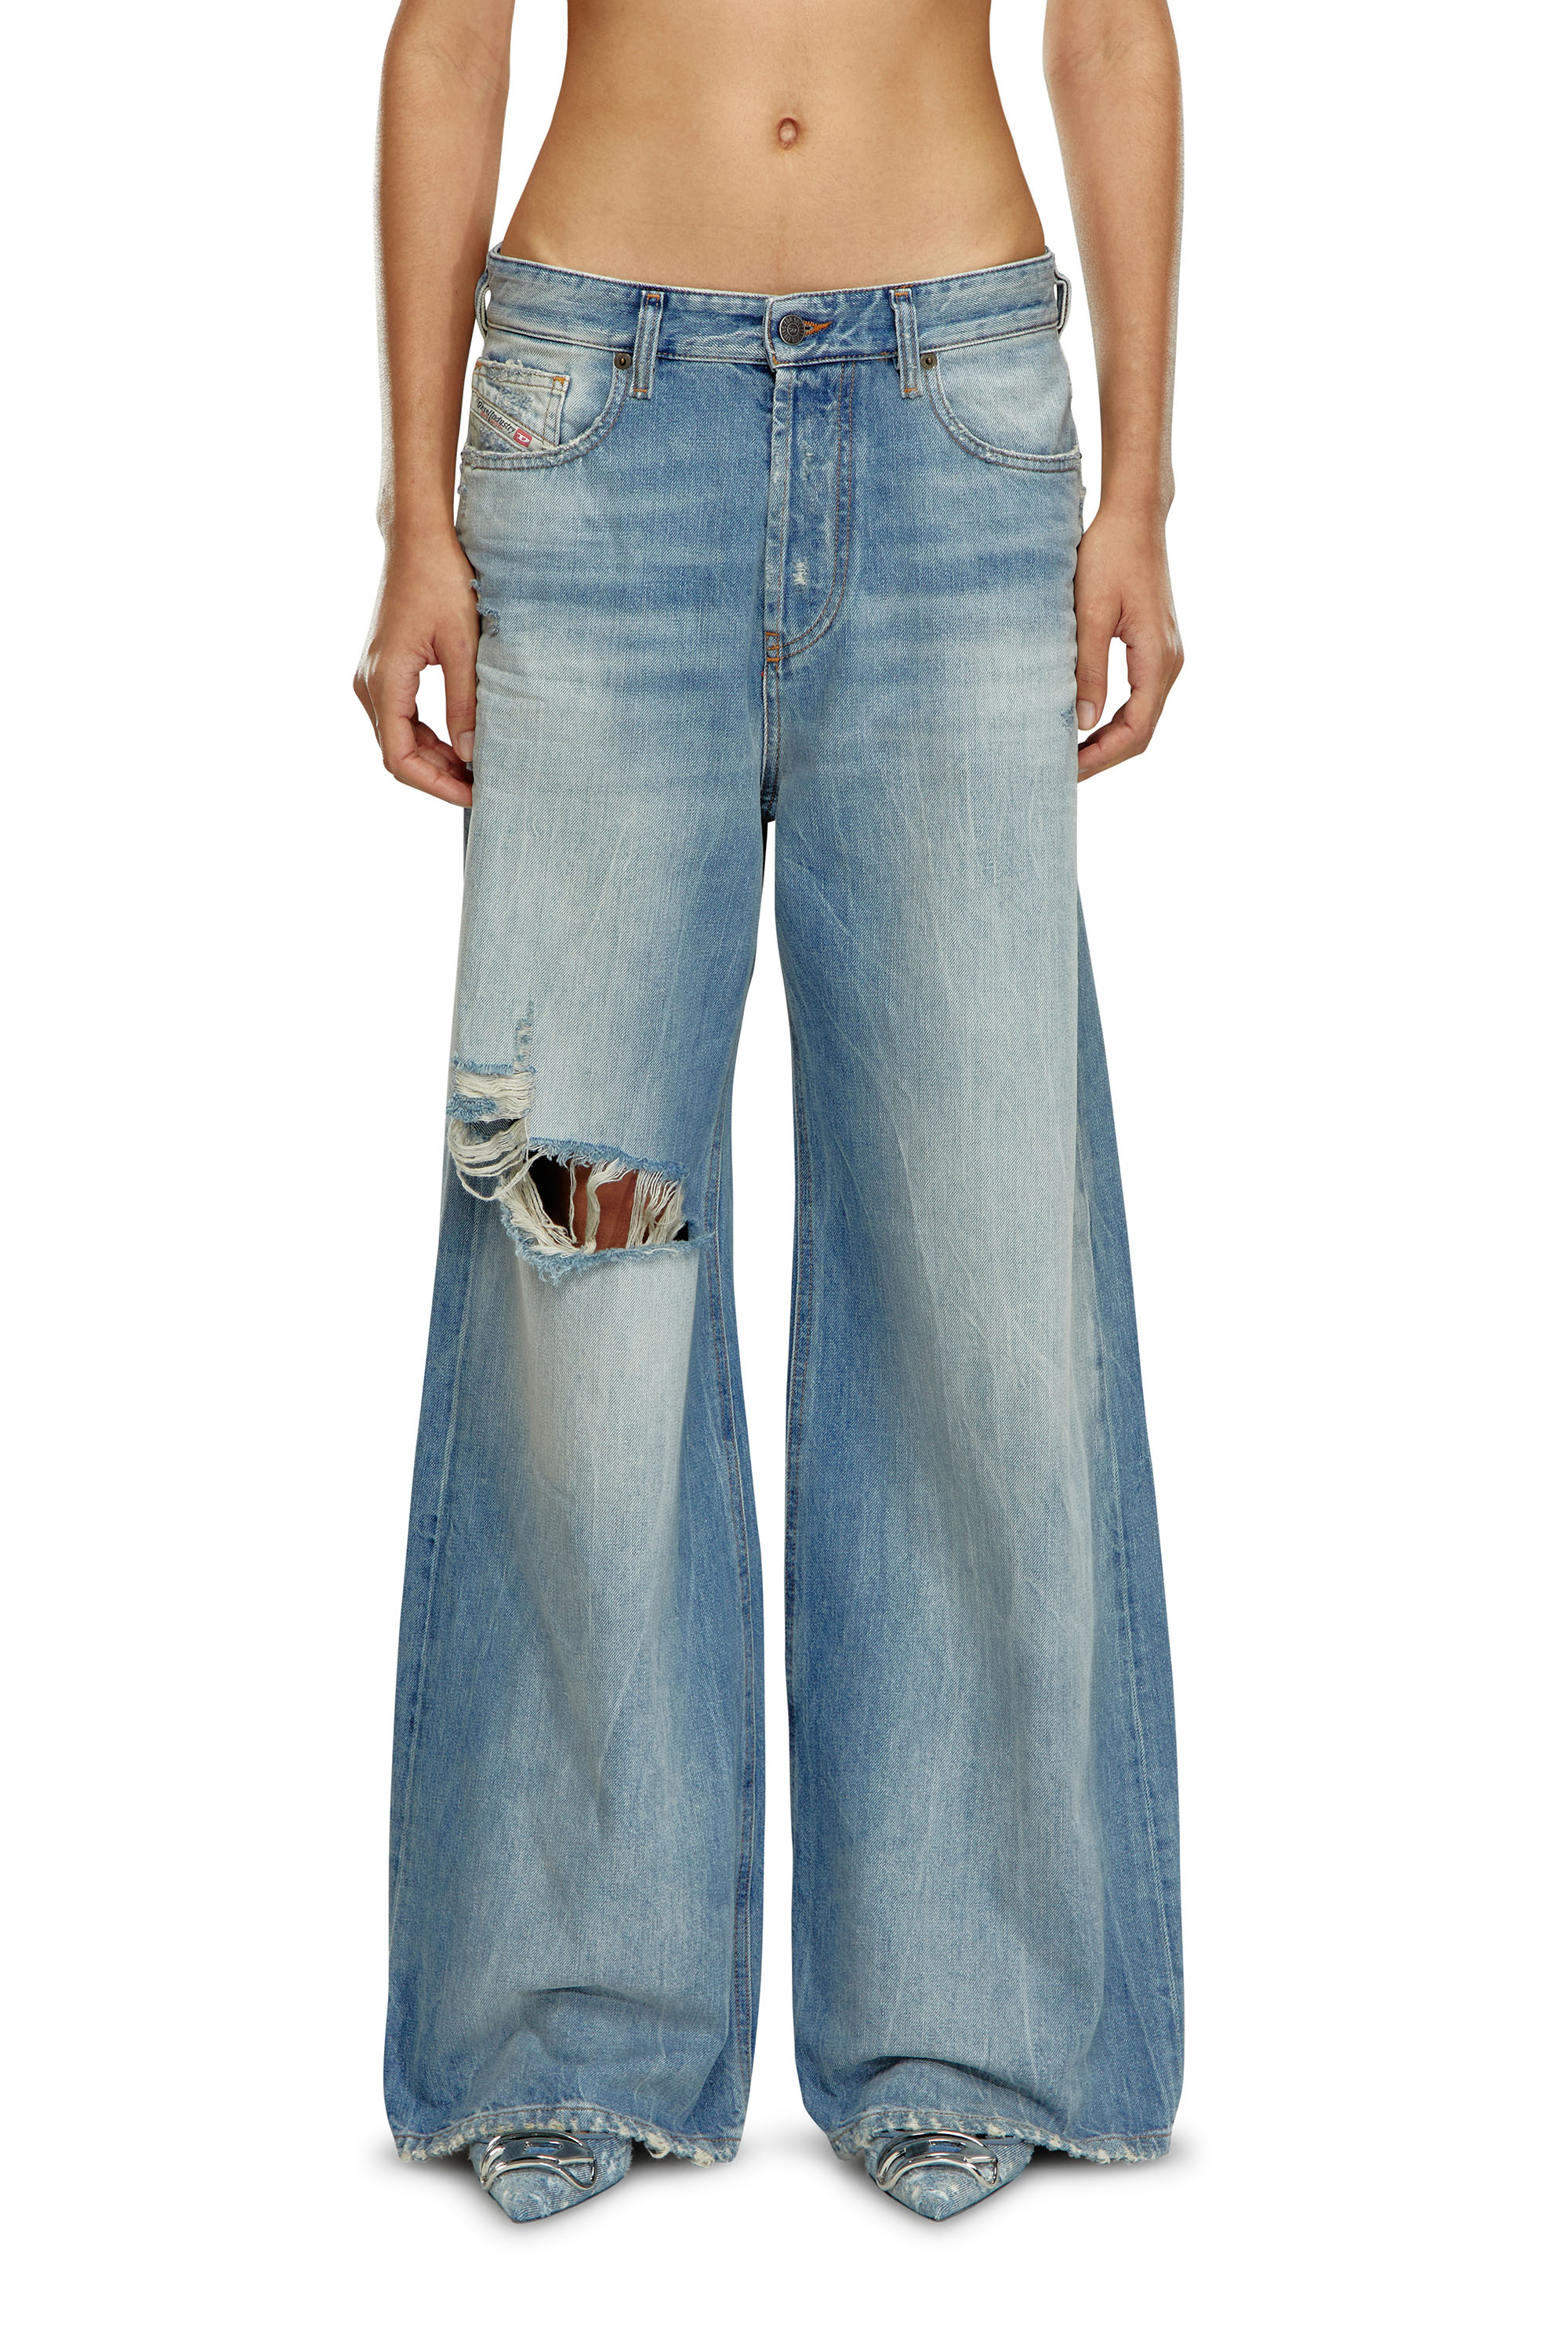 Diesel - Straight Jeans 1996 D-Sire 09H58, Mujer Straight Jeans - 1996 D-Sire in Azul marino - Image 2